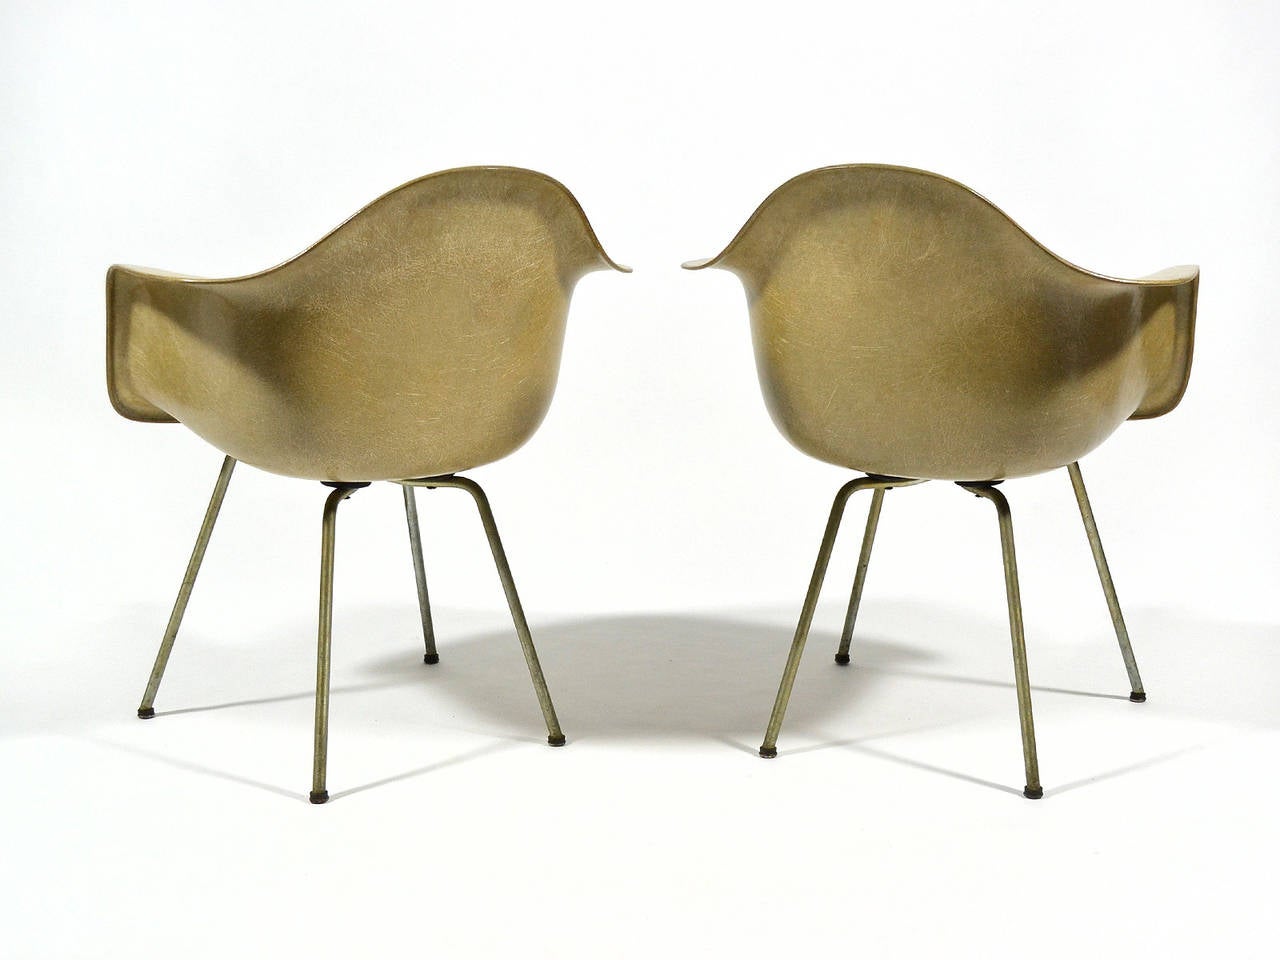 American Pair of Eames SAX Armchairs by Zenith Plastics for Herman Miller